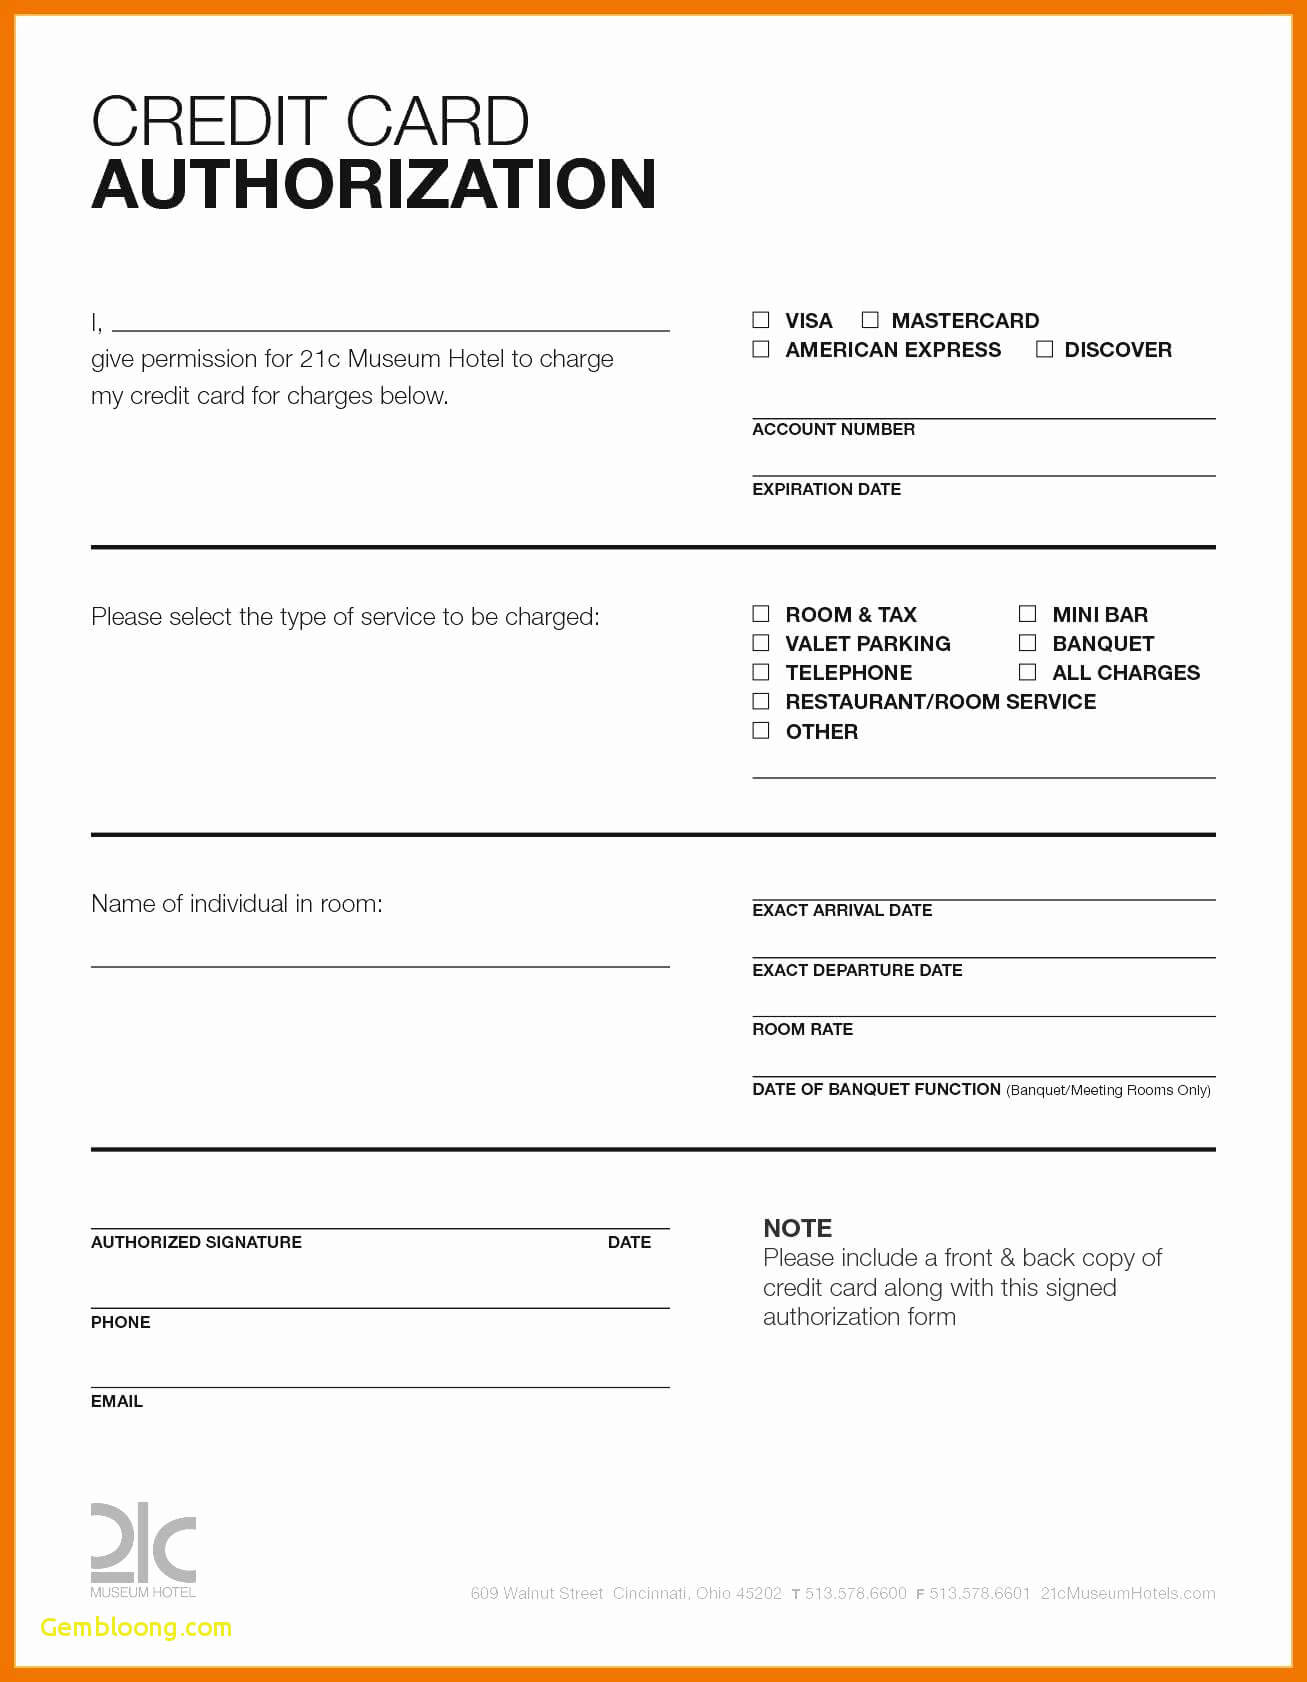 Hotel Credit Card Authorization Form Template Elegant With Regard To Hotel Credit Card Authorization Form Template